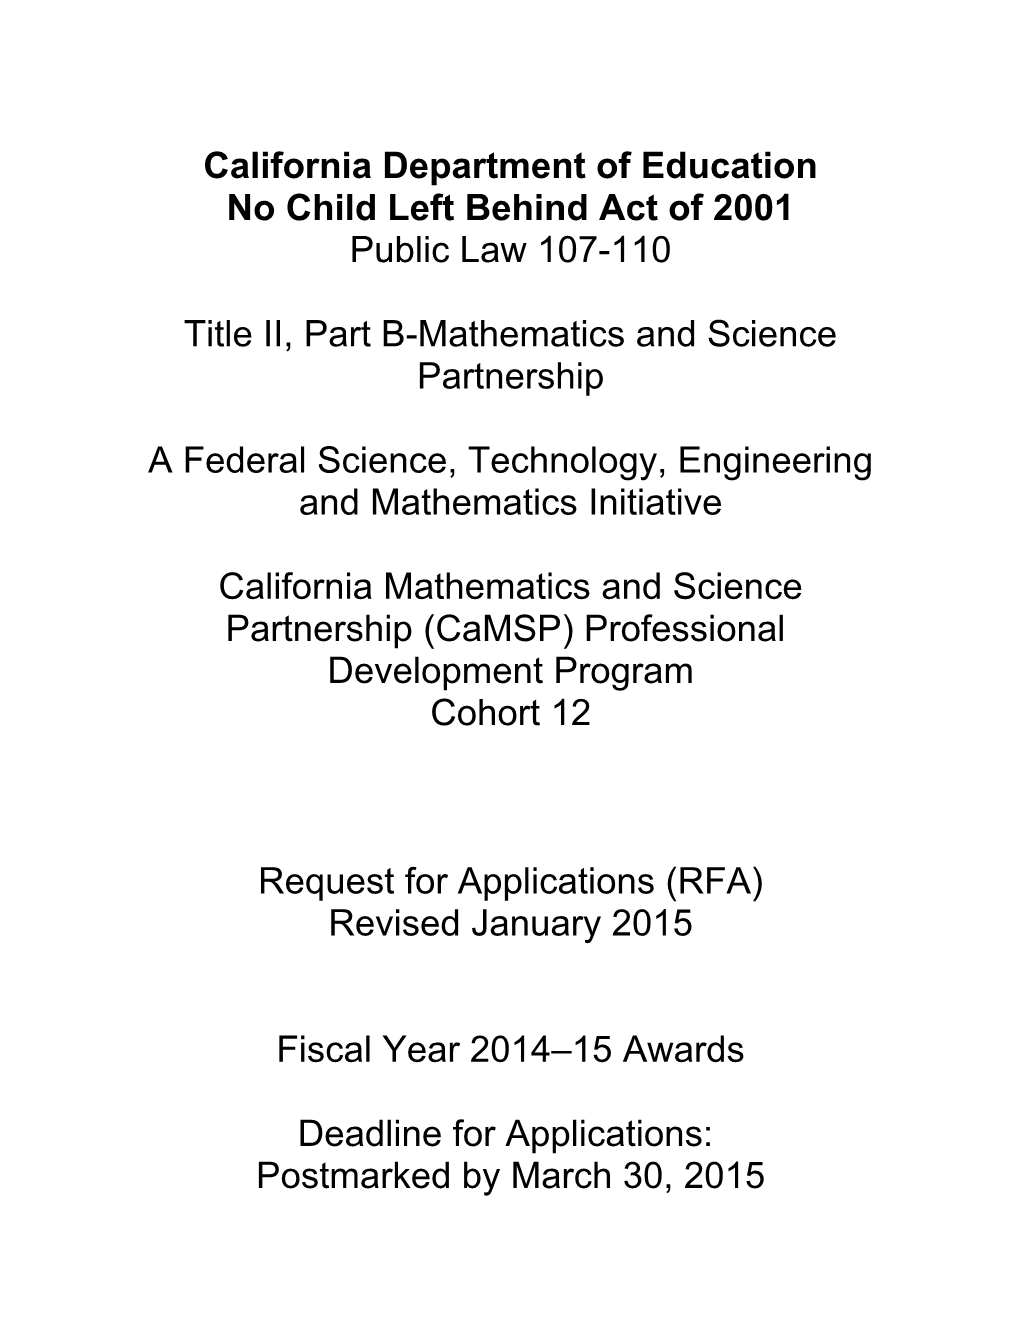 RFA-14: Math & Science PD (CA Dept of Education)